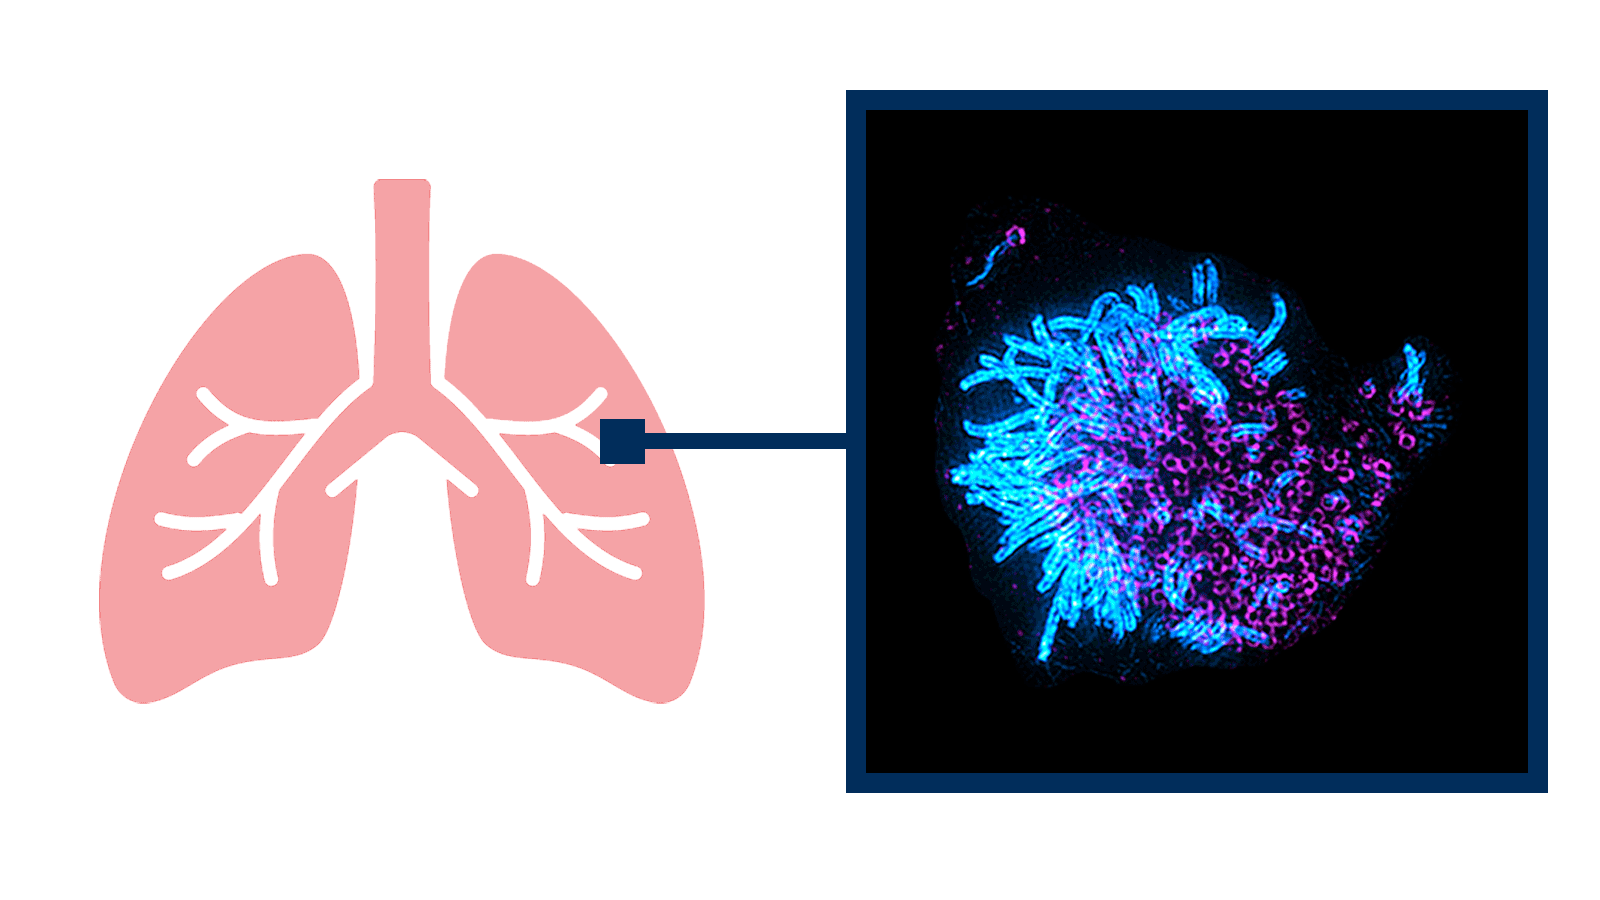 A microscopy of two lung cells that are multiciliated. Besides it is a graphic icon of a set of lungs to show the cells are located in the lungs.